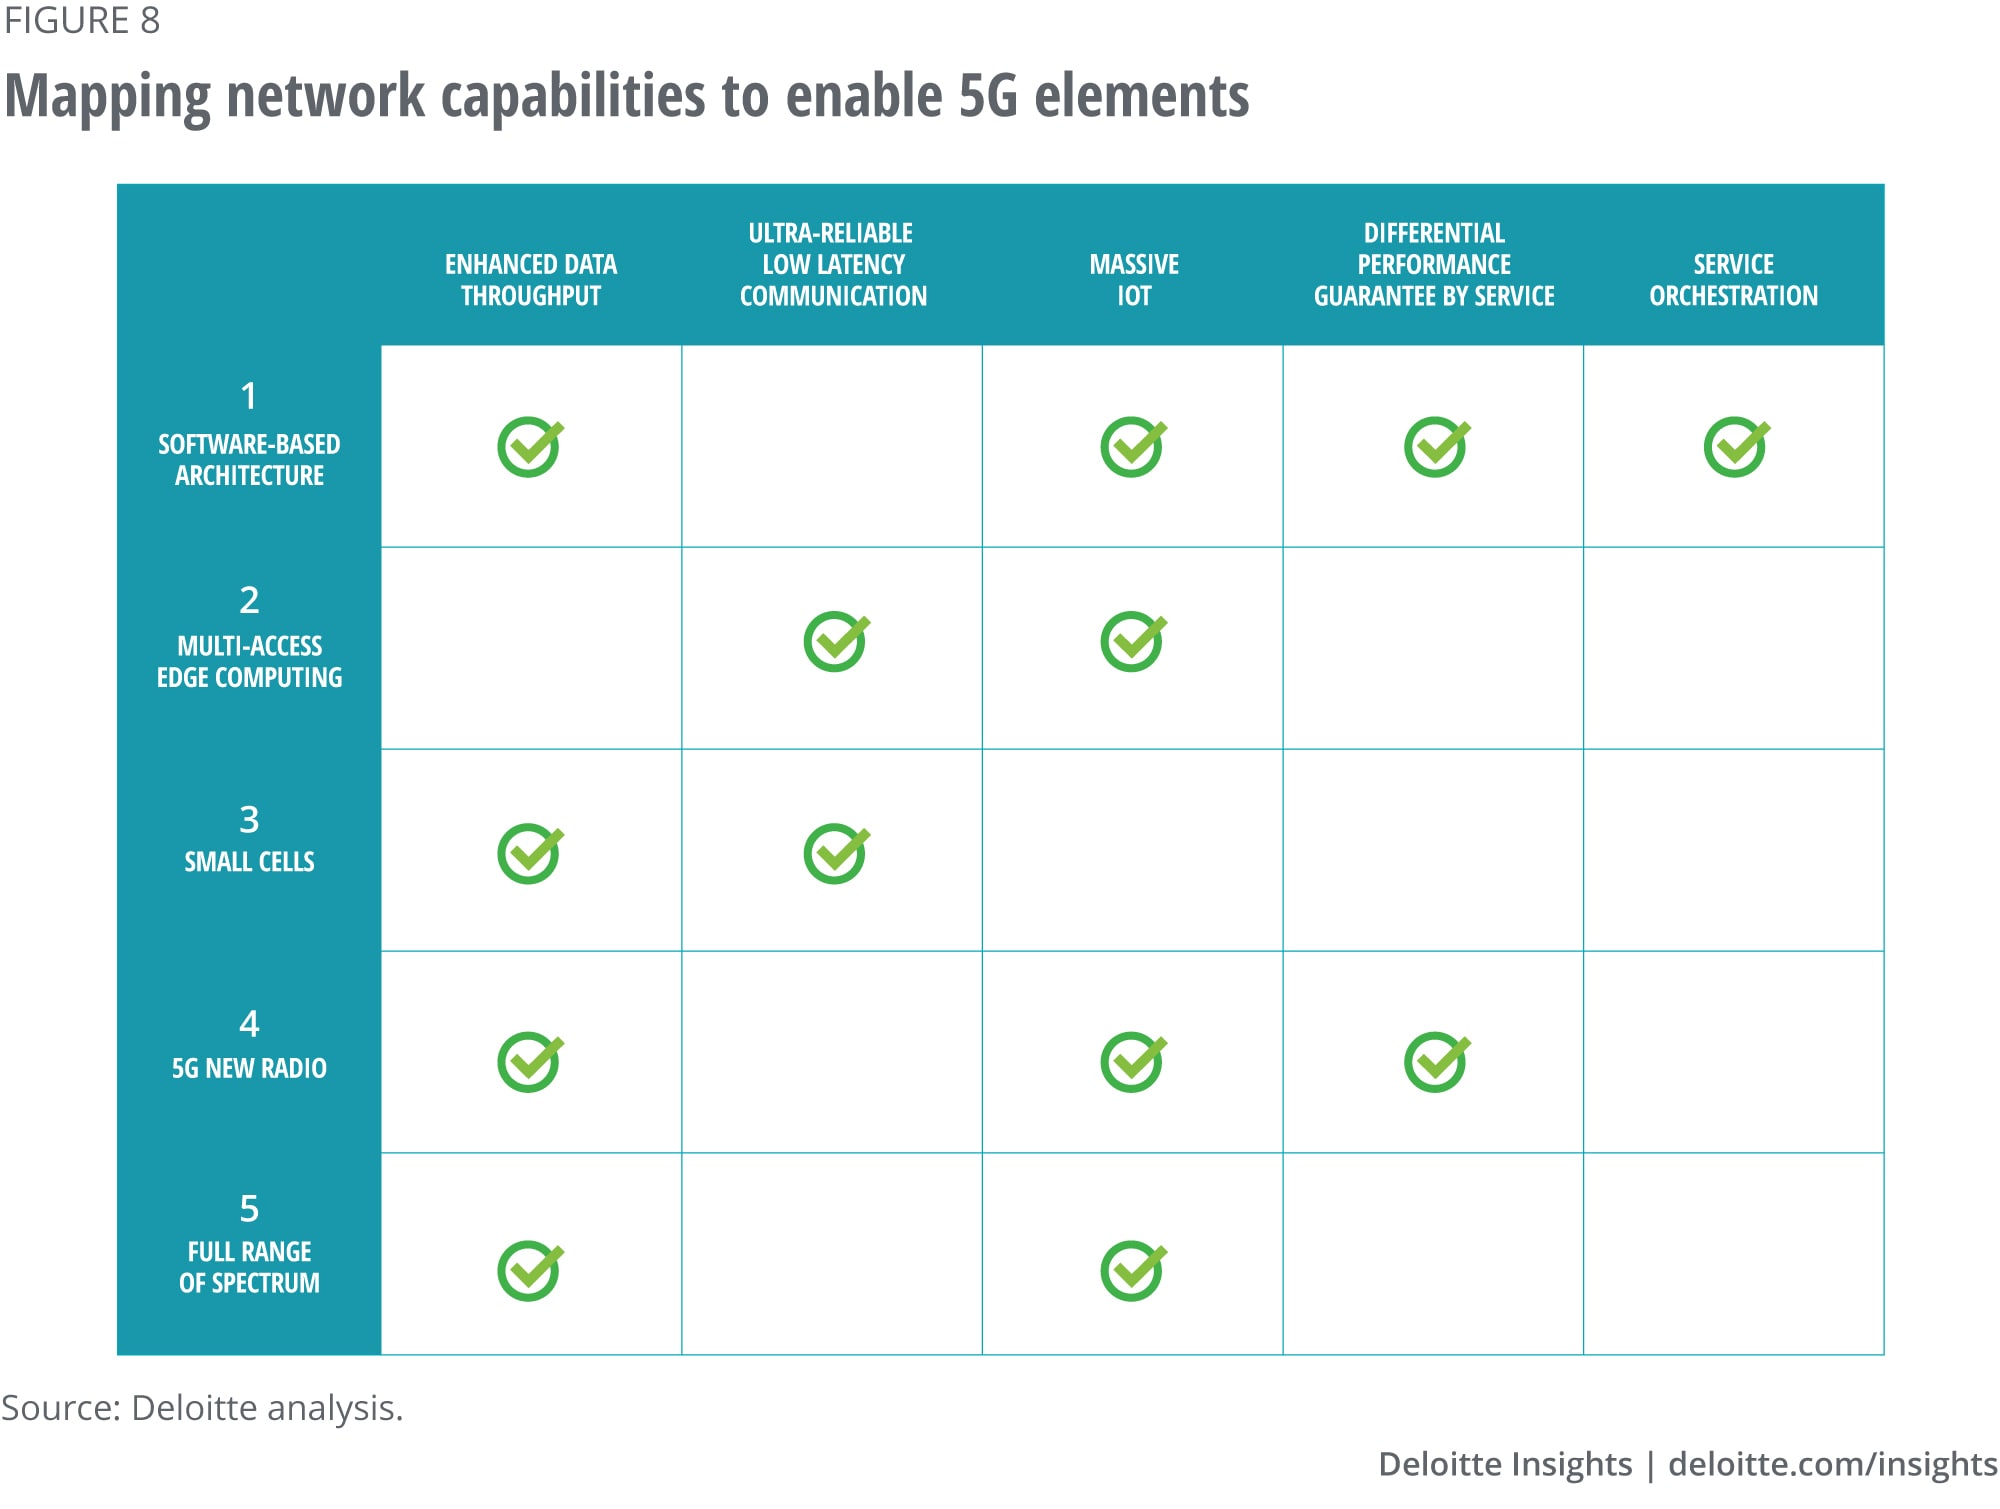 Mapping network capabilities to enabling 5G elements